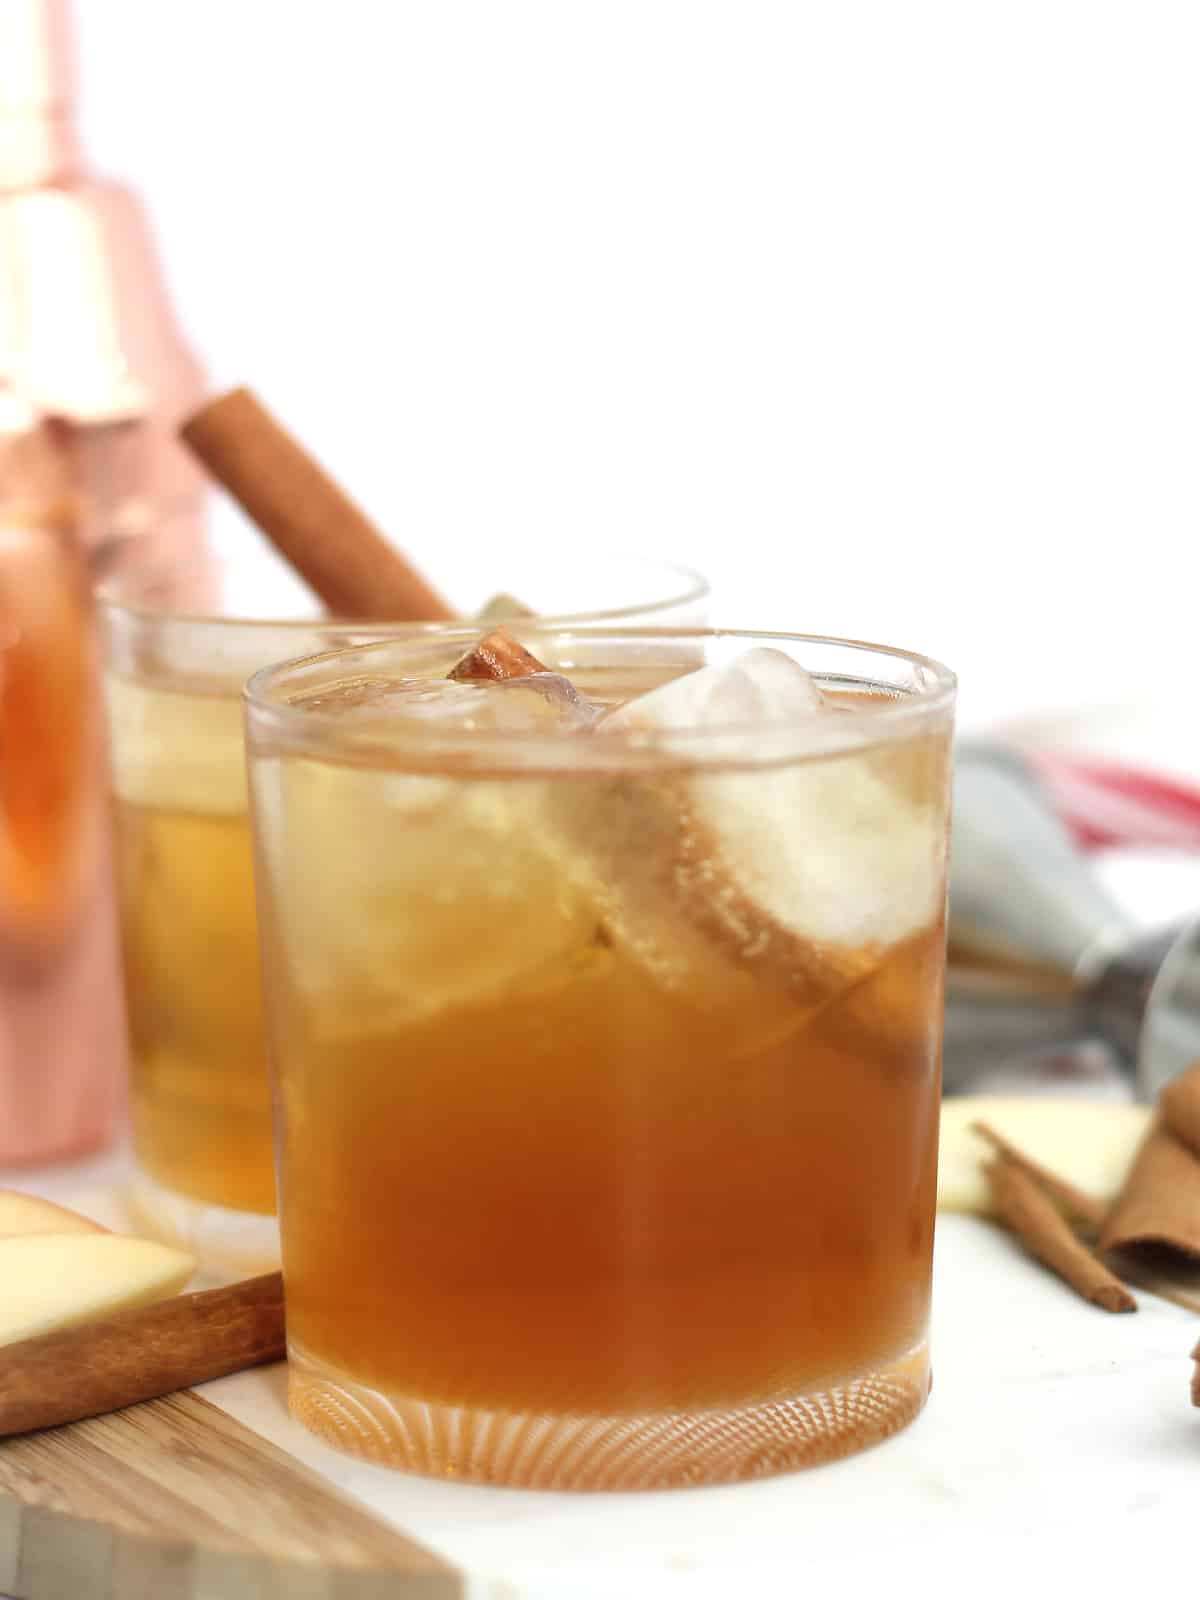 A cocktail with large ice cubes and a cinnamon stick.